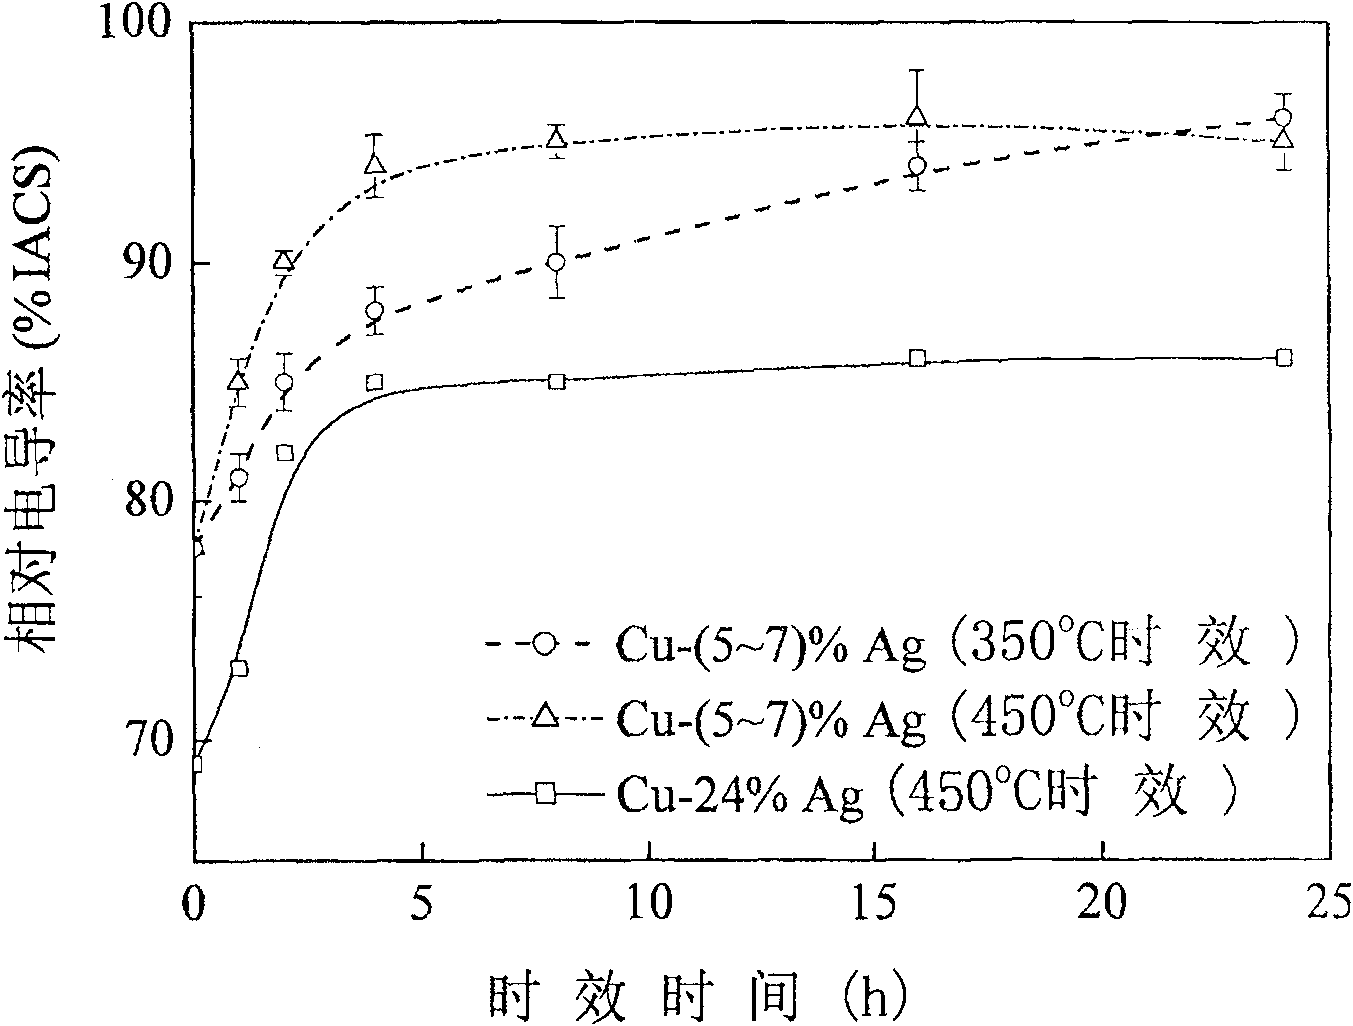 Solid solution aging technique for modifying Cu-Ag alloy rigidity and electric conductivity